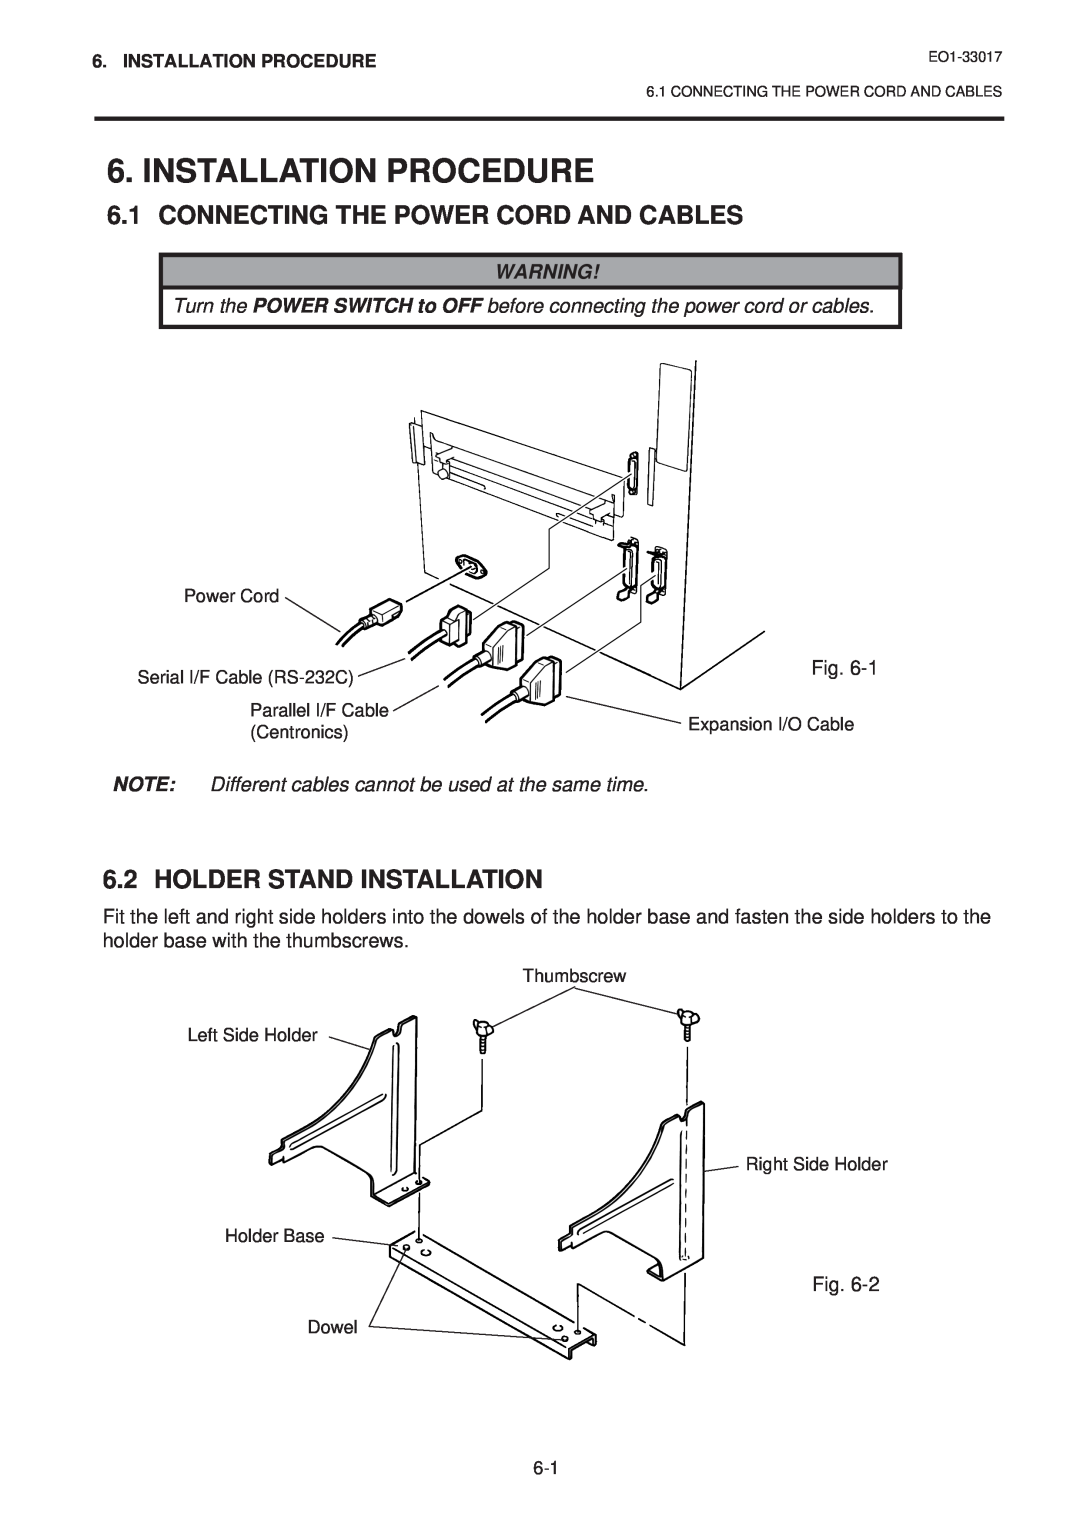 Toshiba B-880-QQ SERIES Installation Procedure, Connecting The Power Cord And Cables, Holder Stand Installation 